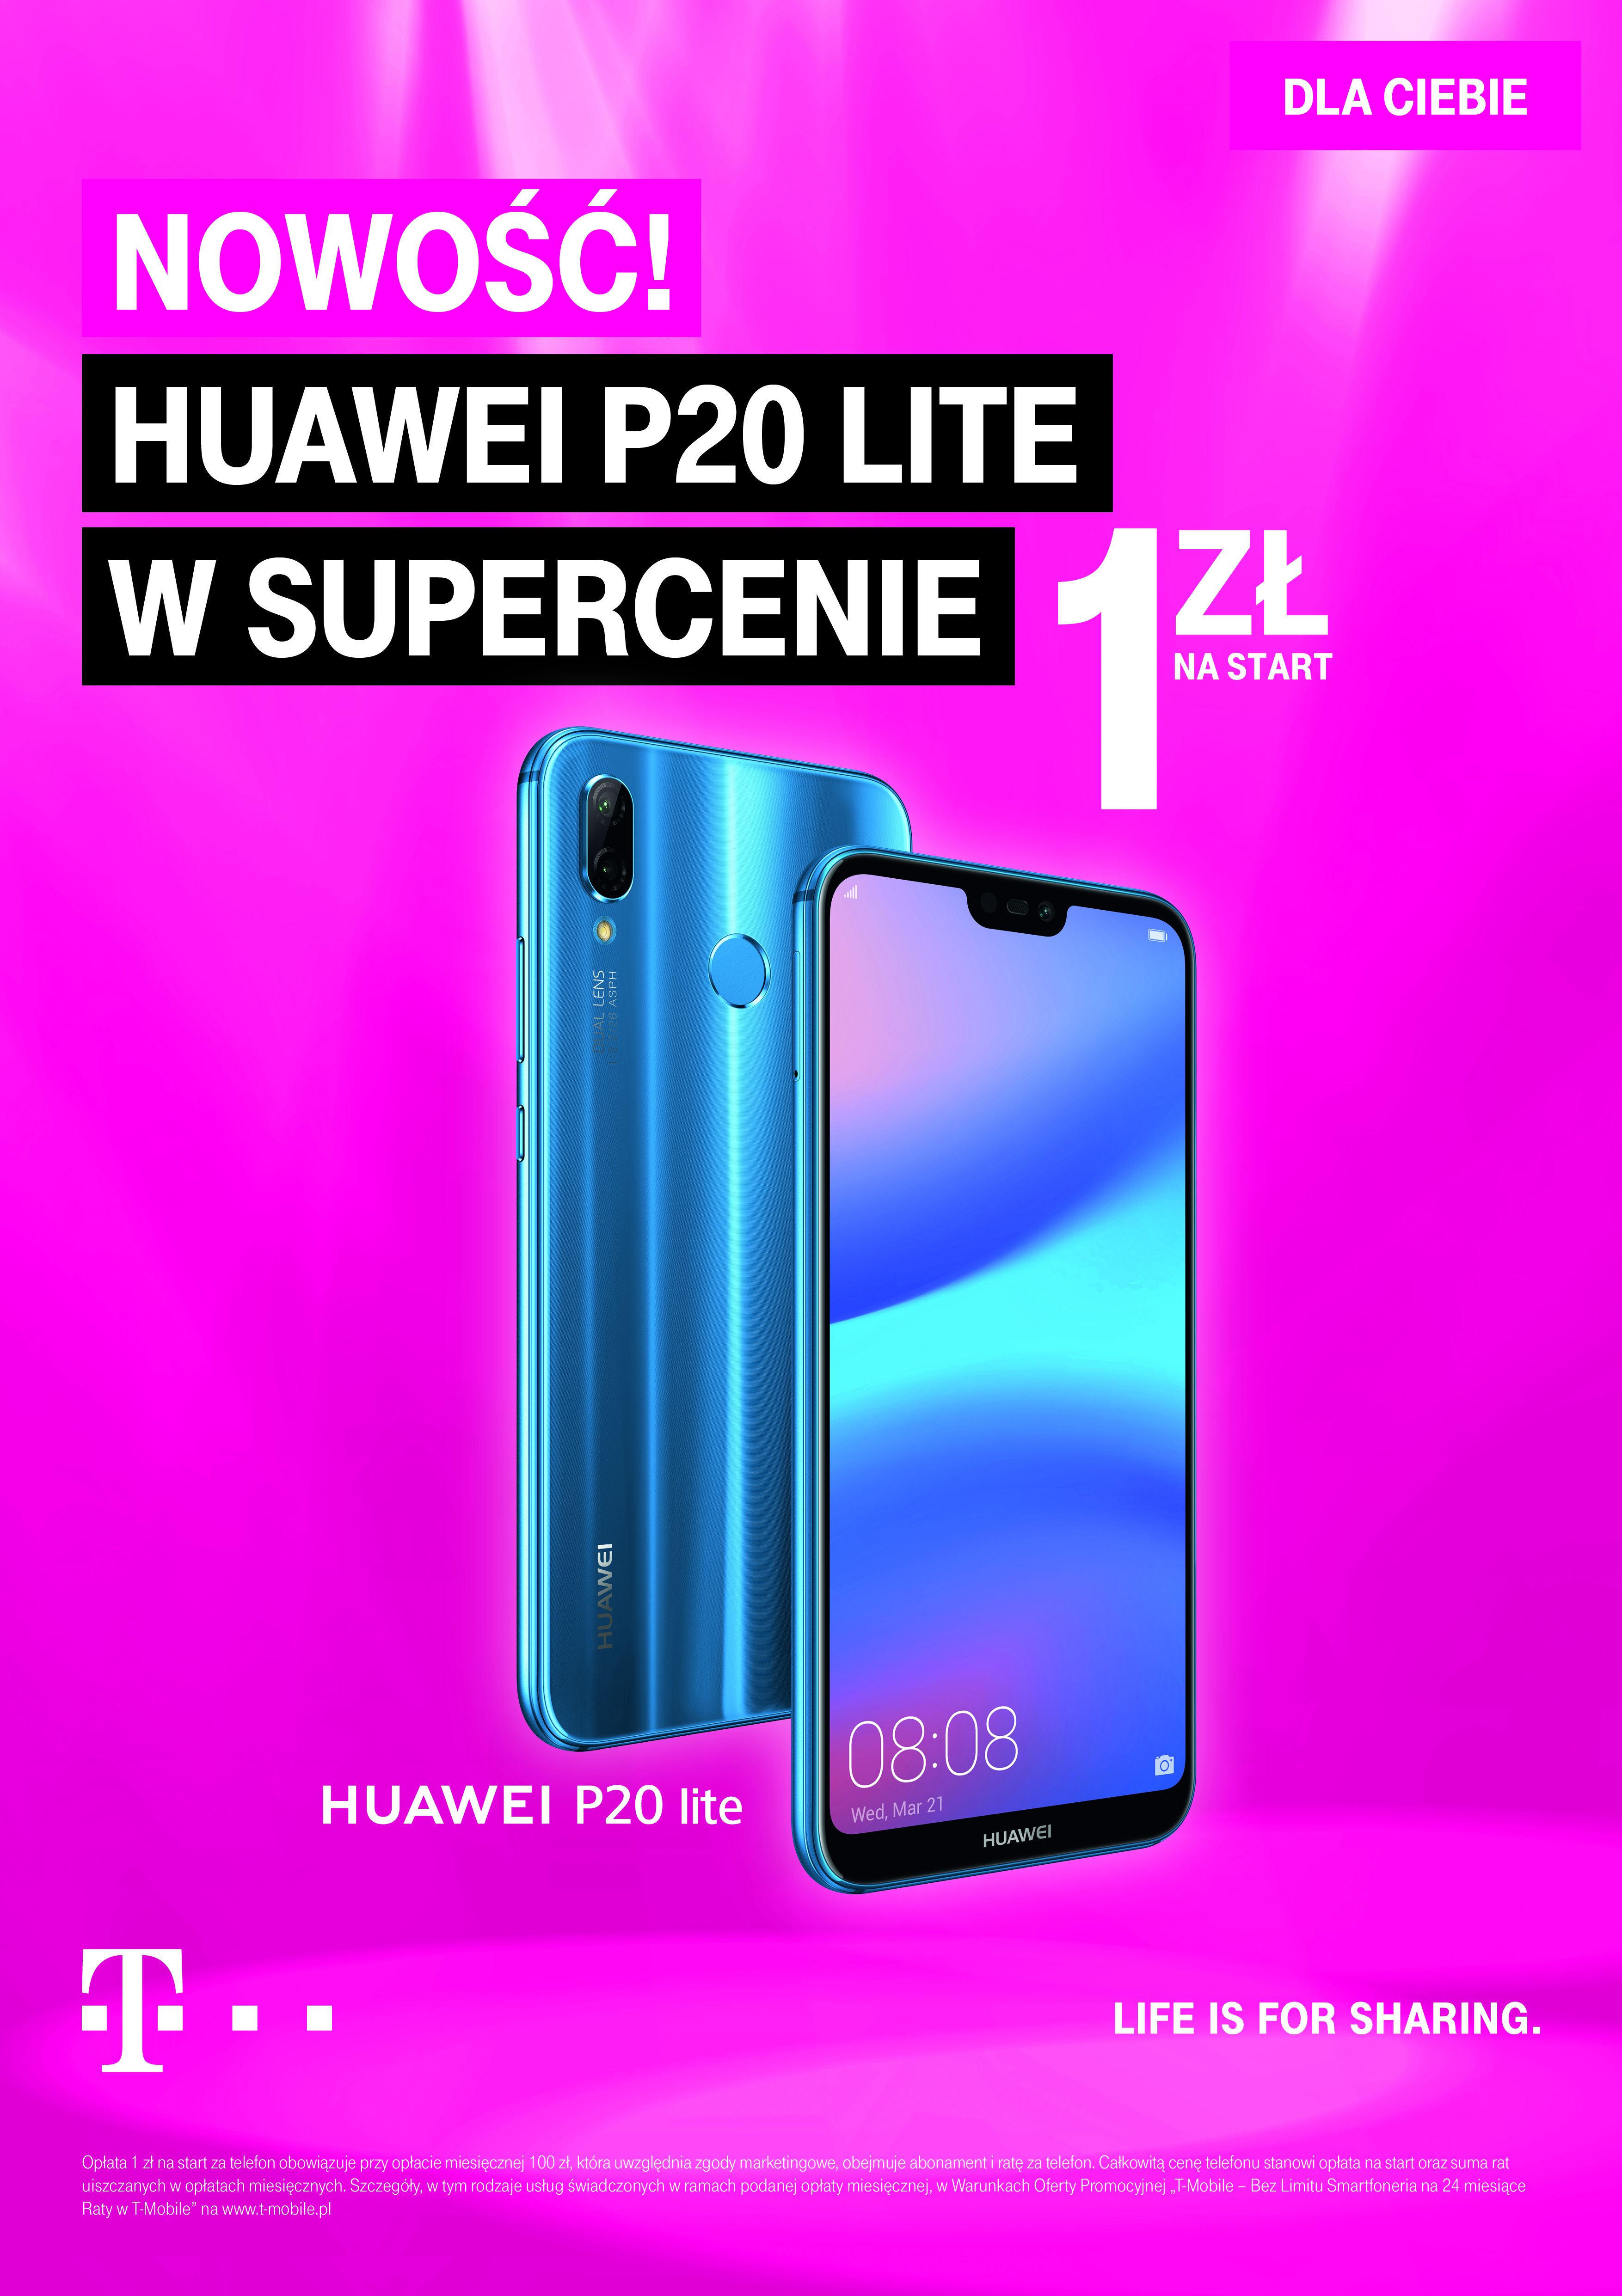 Huawei p20 pro midnight blue color